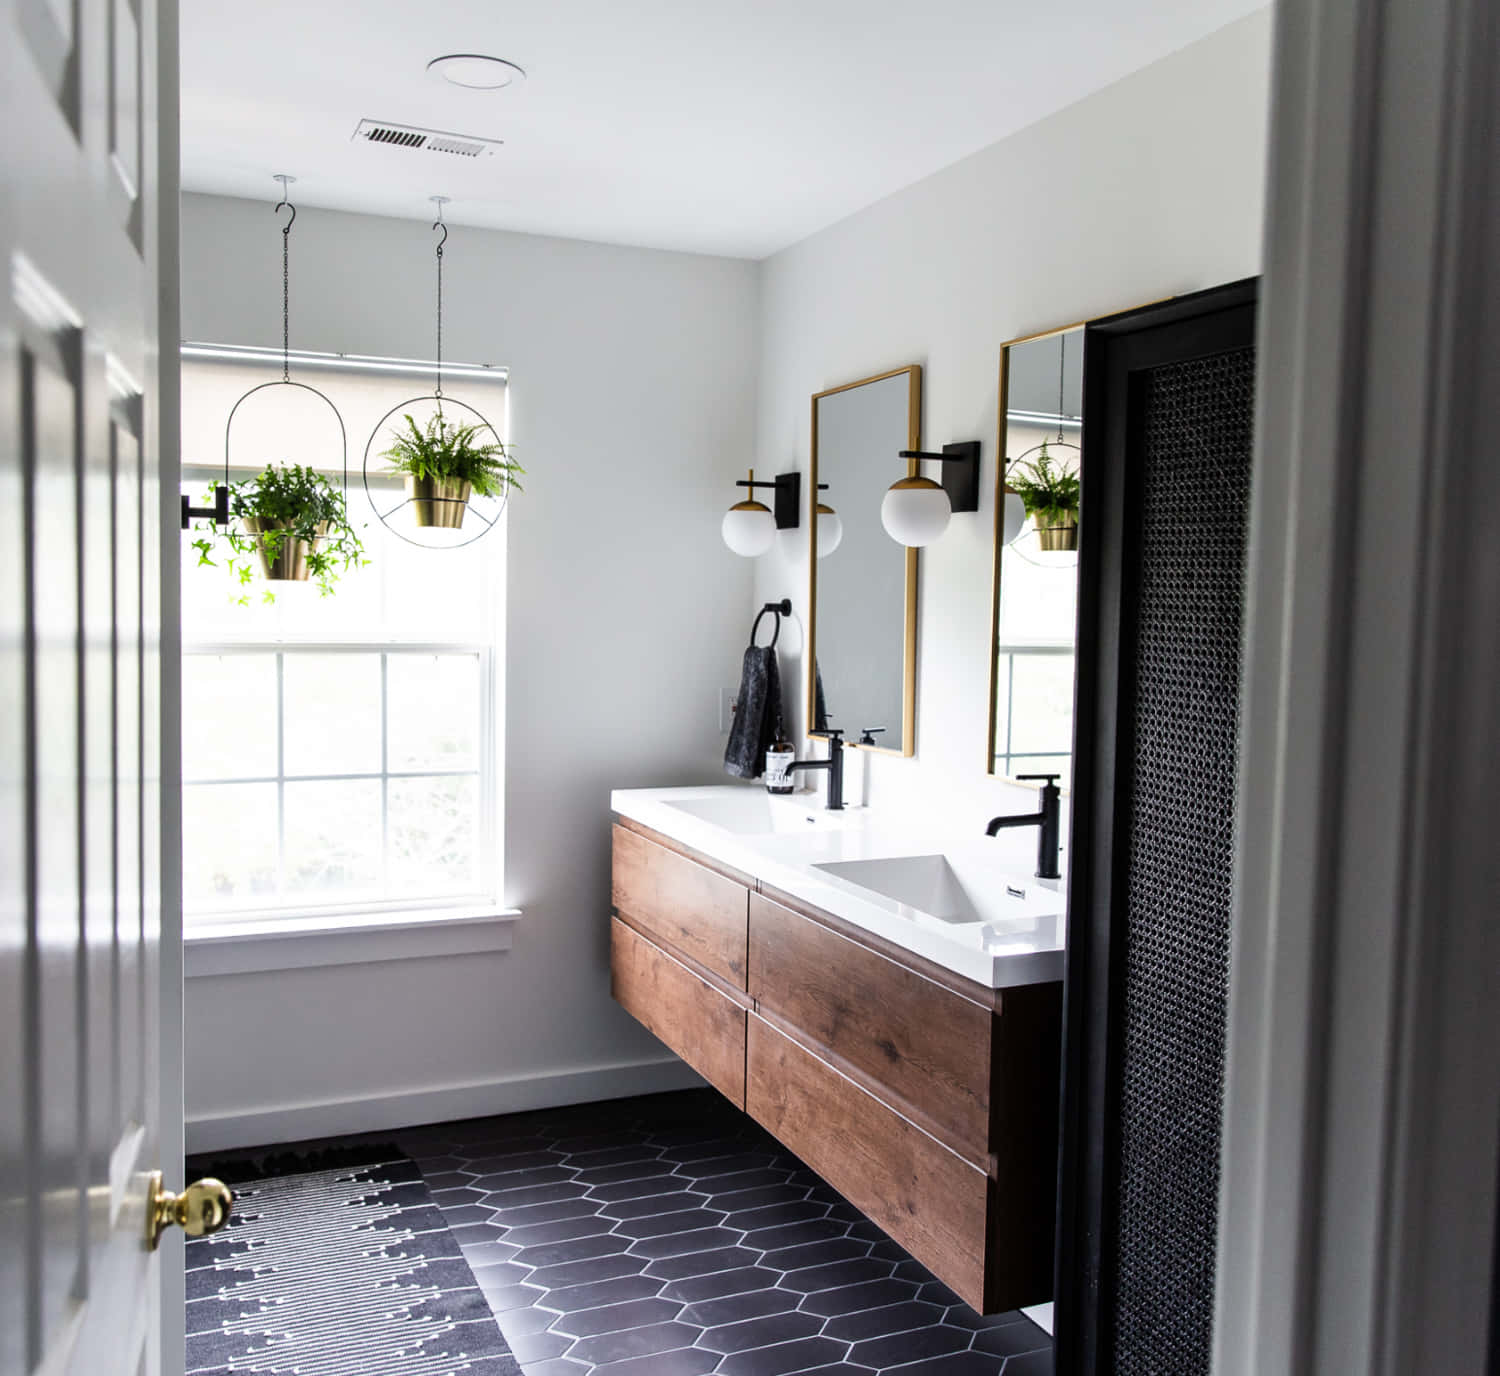 A Bathroom With Black And White Tile And Wooden Cabinets